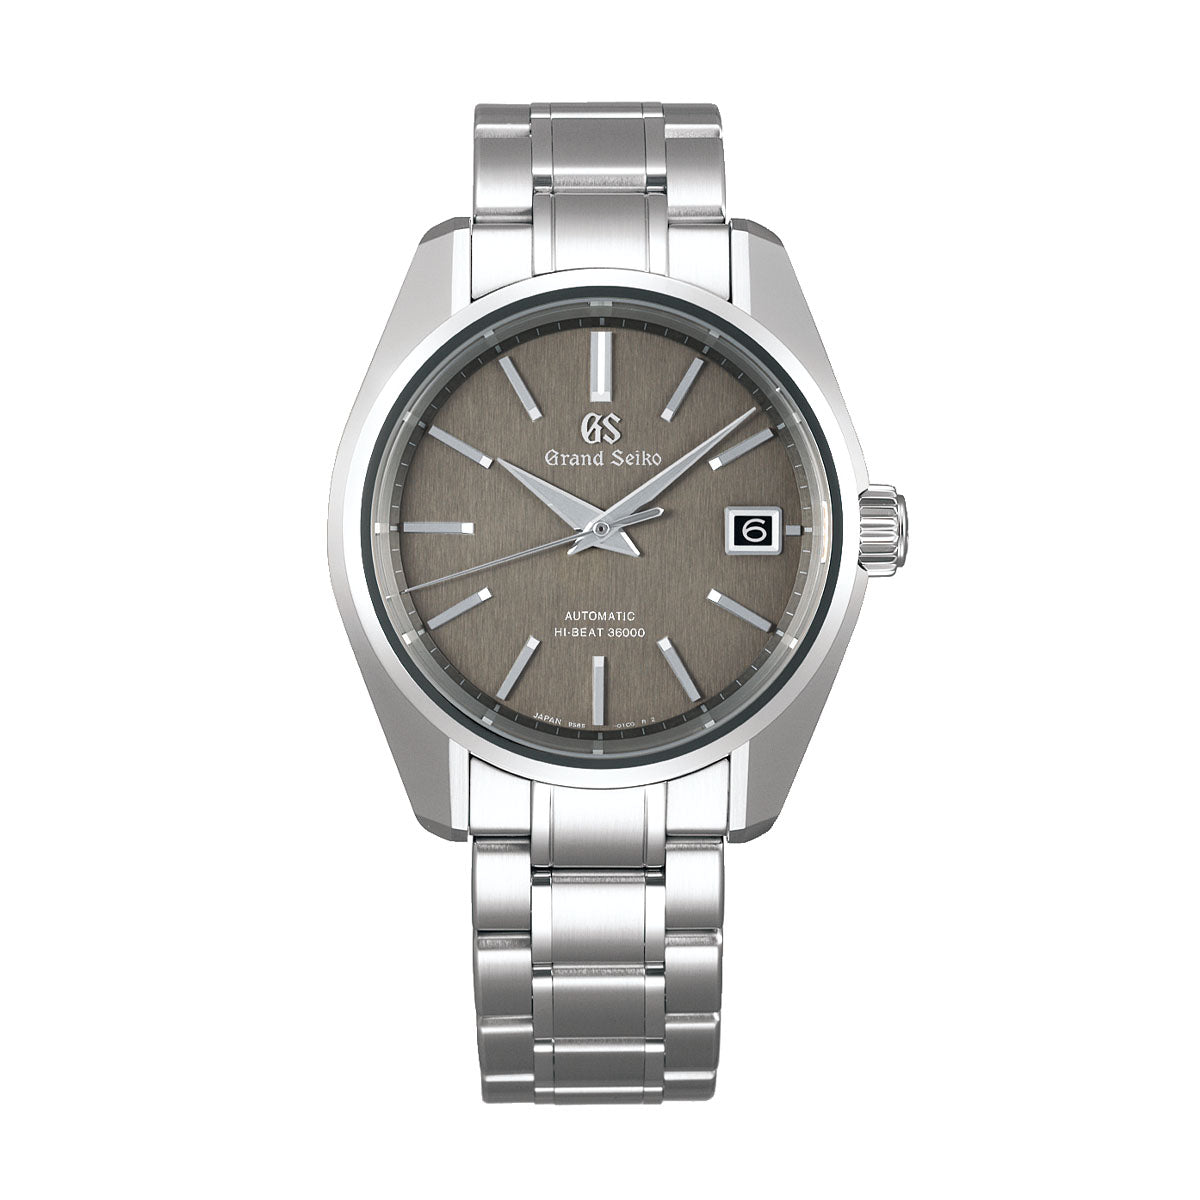 Grand Seiko Heritage Collection 44GS Automatic with Manual Winding Mechanical Hi-Beat 36000 40mm Watch